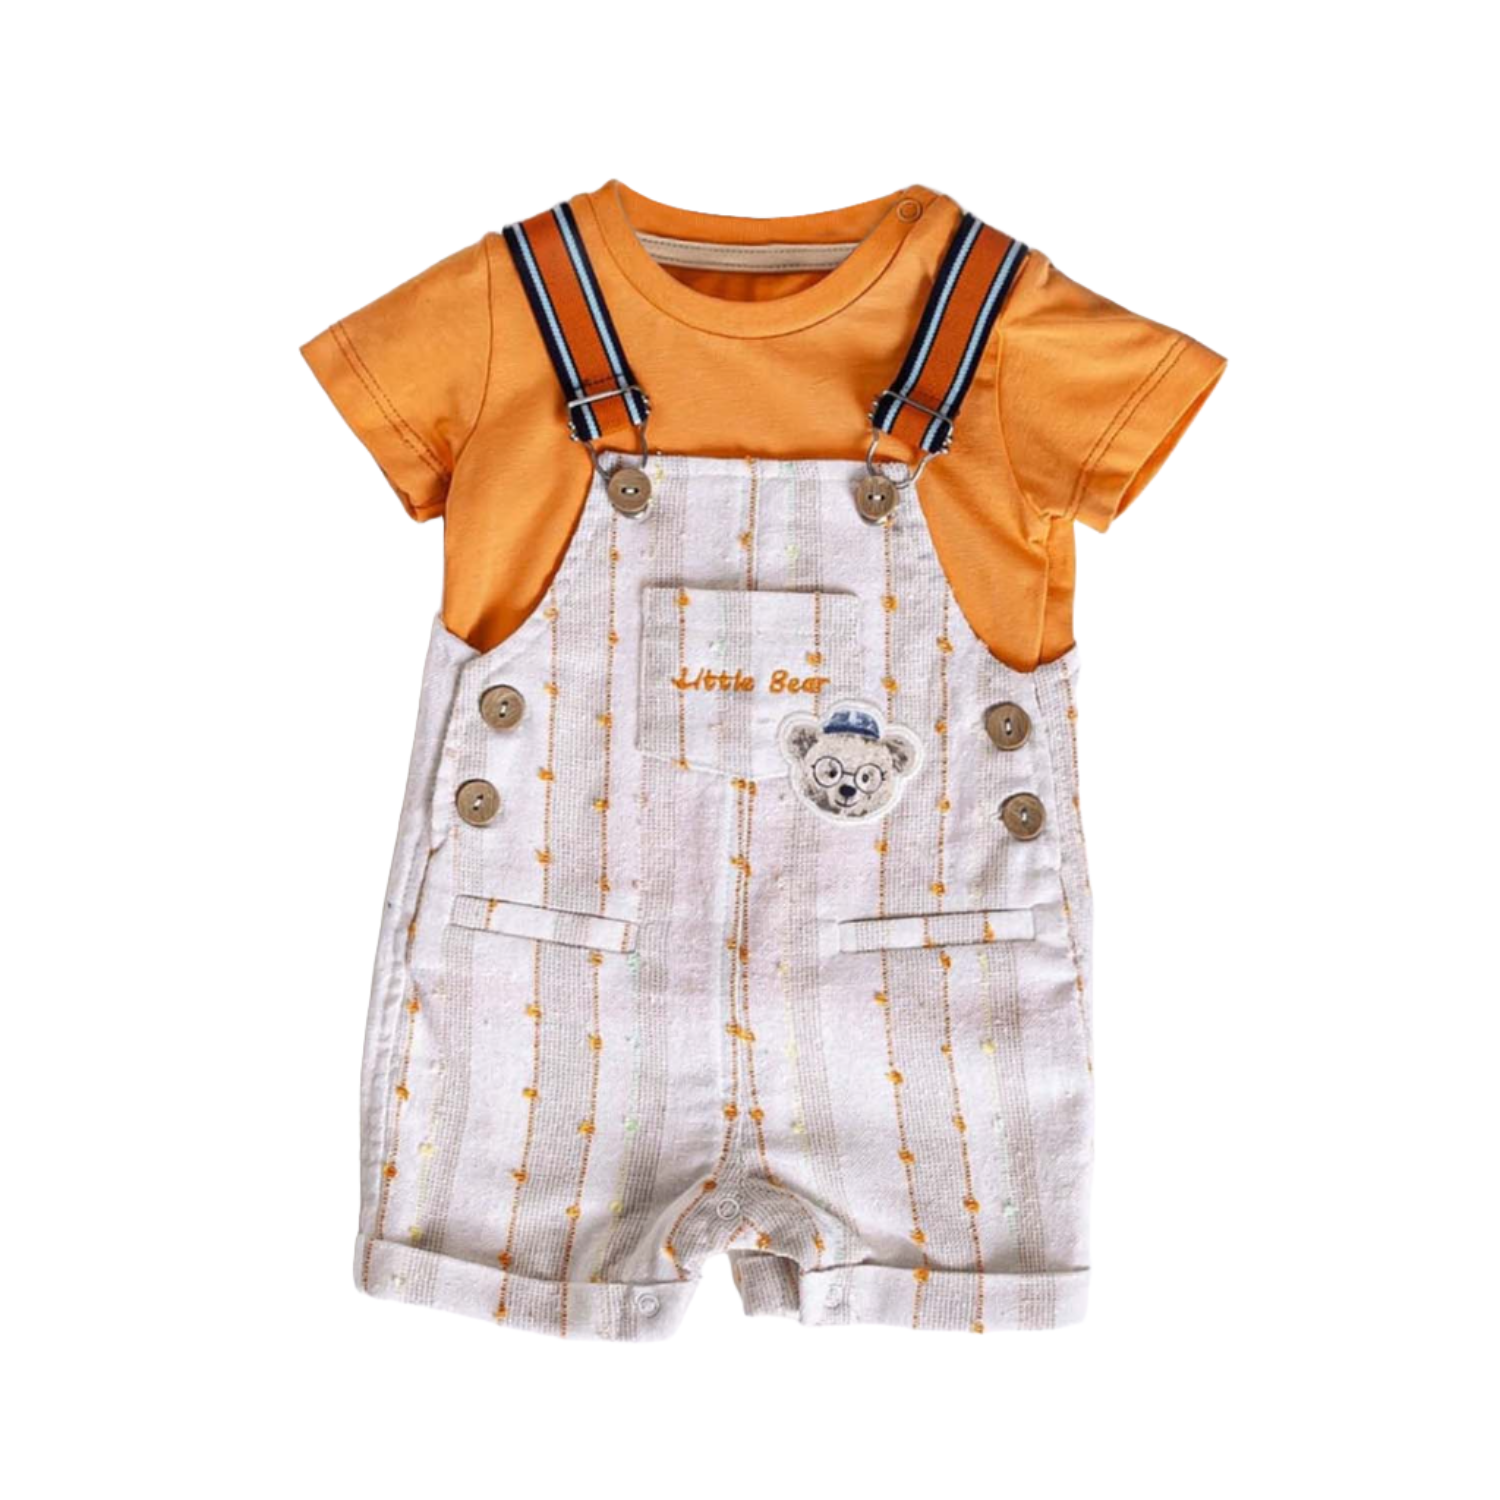 Infant Boys' Shortalls Green, Orange and Purple 2-Piece Set Perfect for Summer